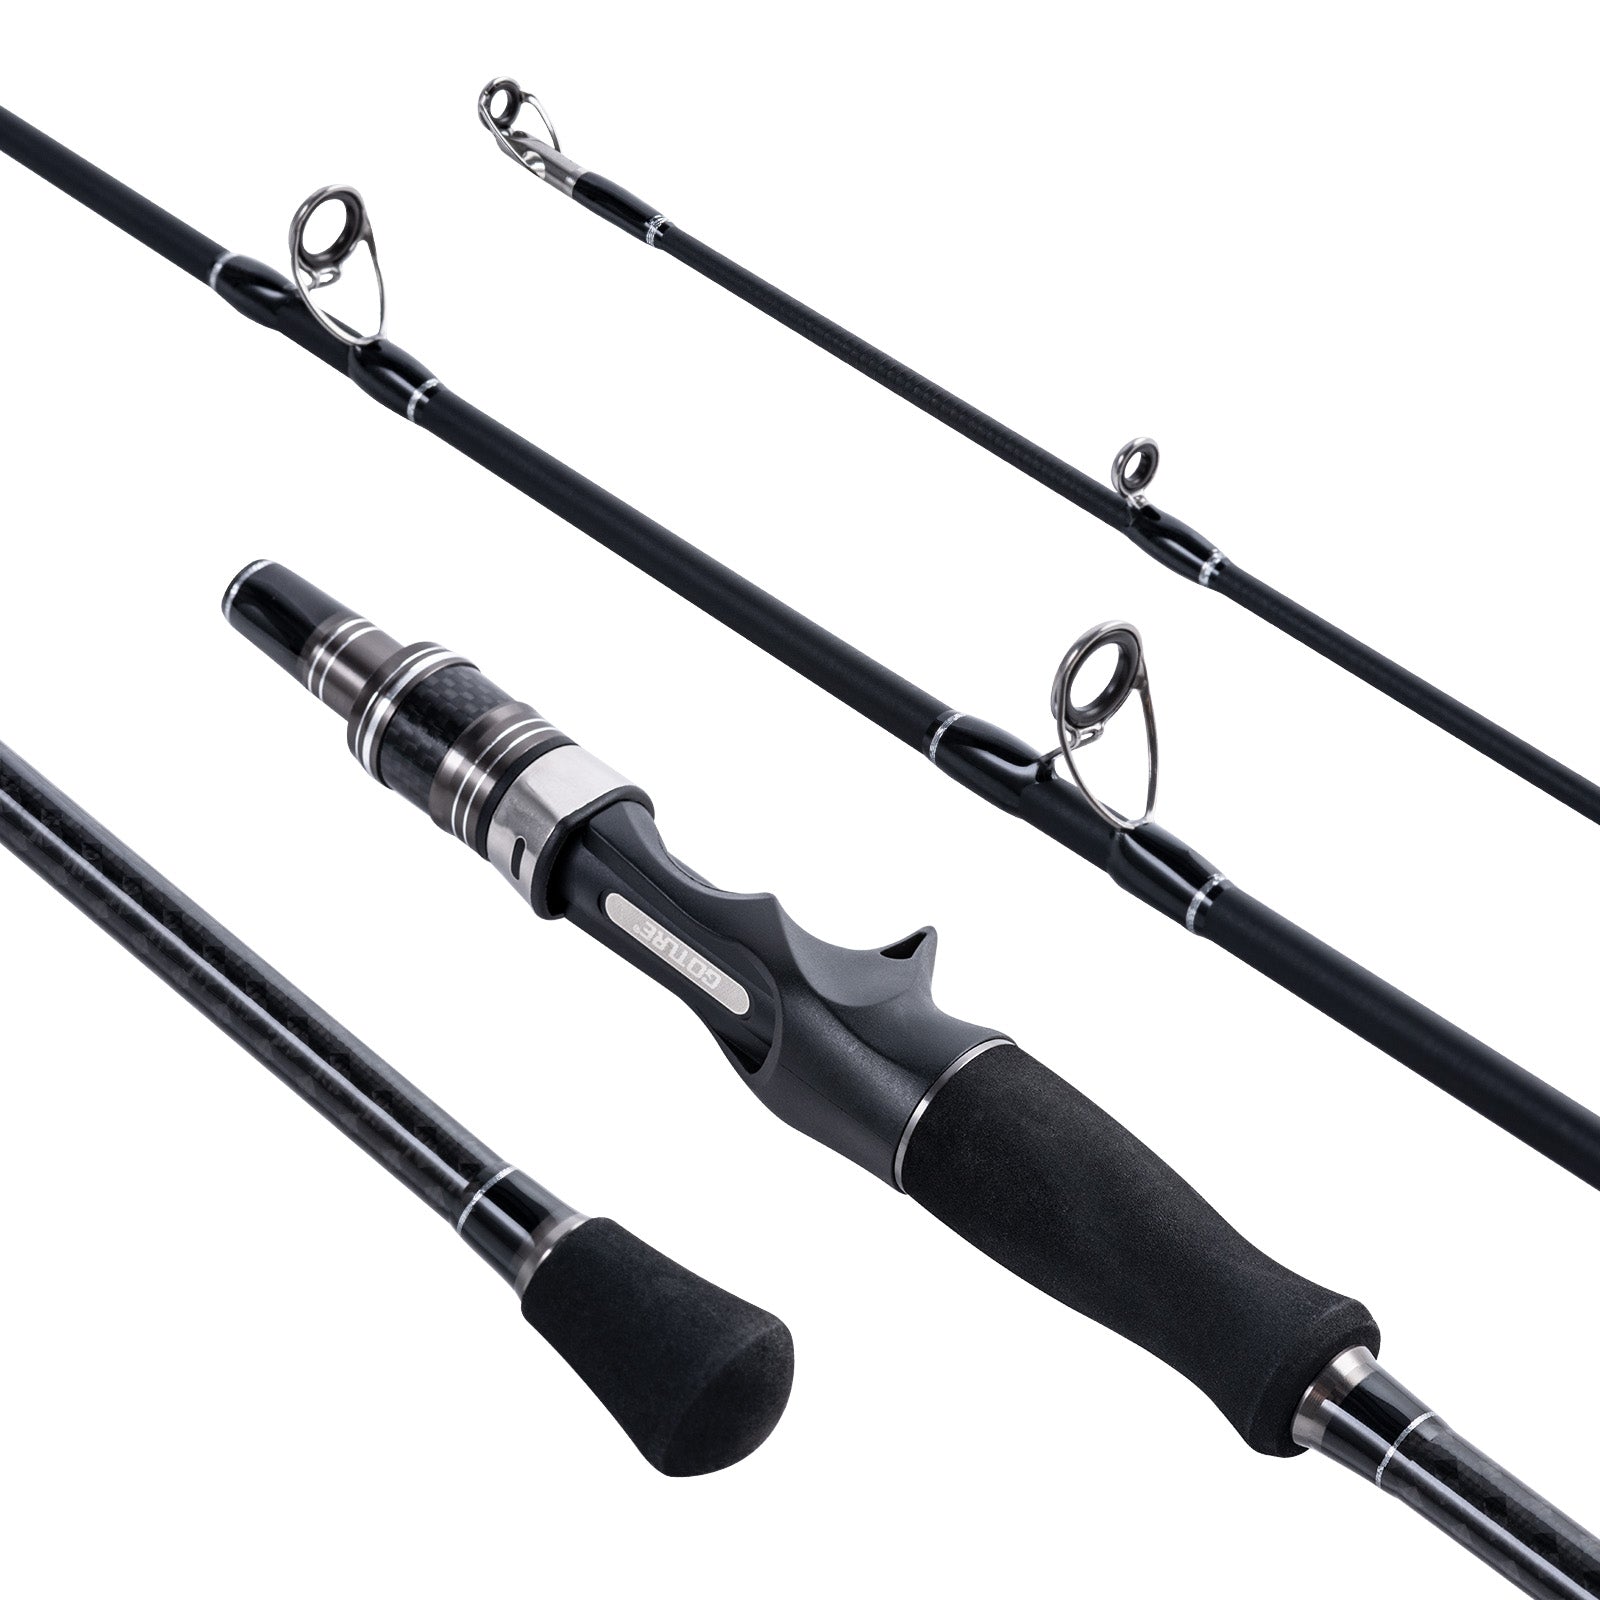 Goture Travel Fishing Rod with Case - Casting/Surf/Spinning Fishing Rods -  Portable 4 Sections Lightweight Carbon Fiber Fishing Rods 6.6ft - 12ft for